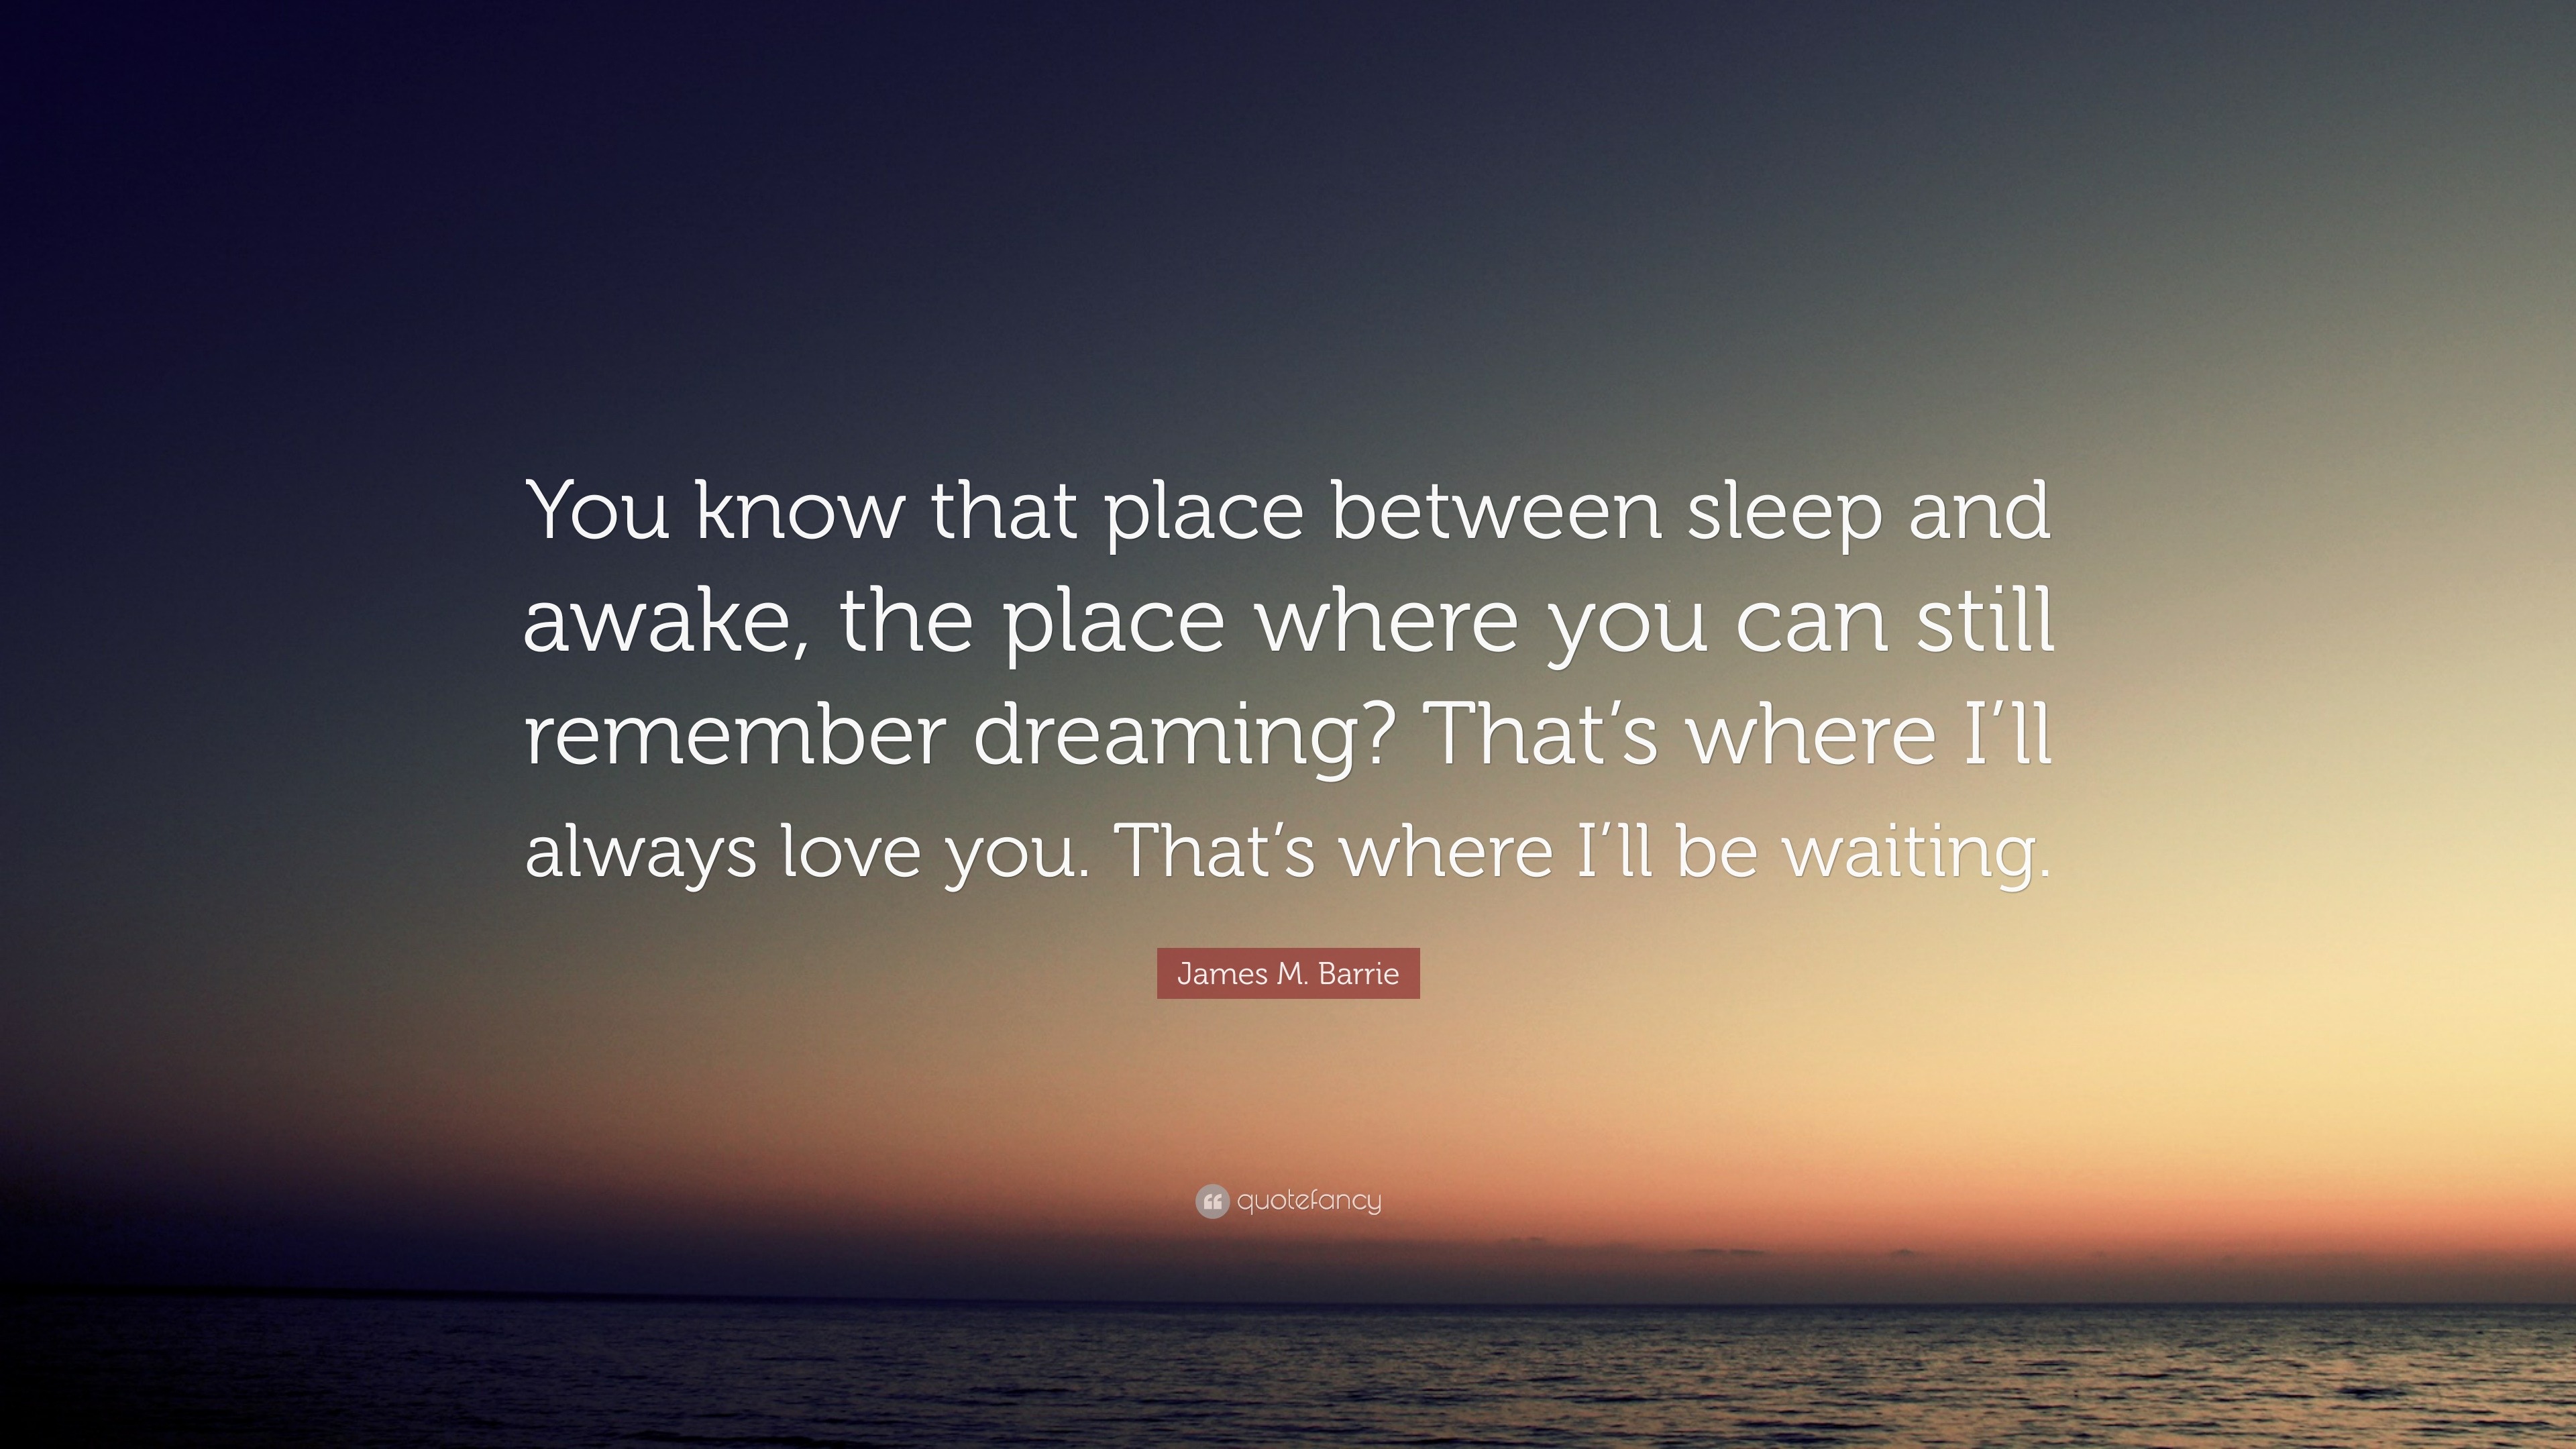 James M. Barrie Quote: “You know that place between sleep and awake ...